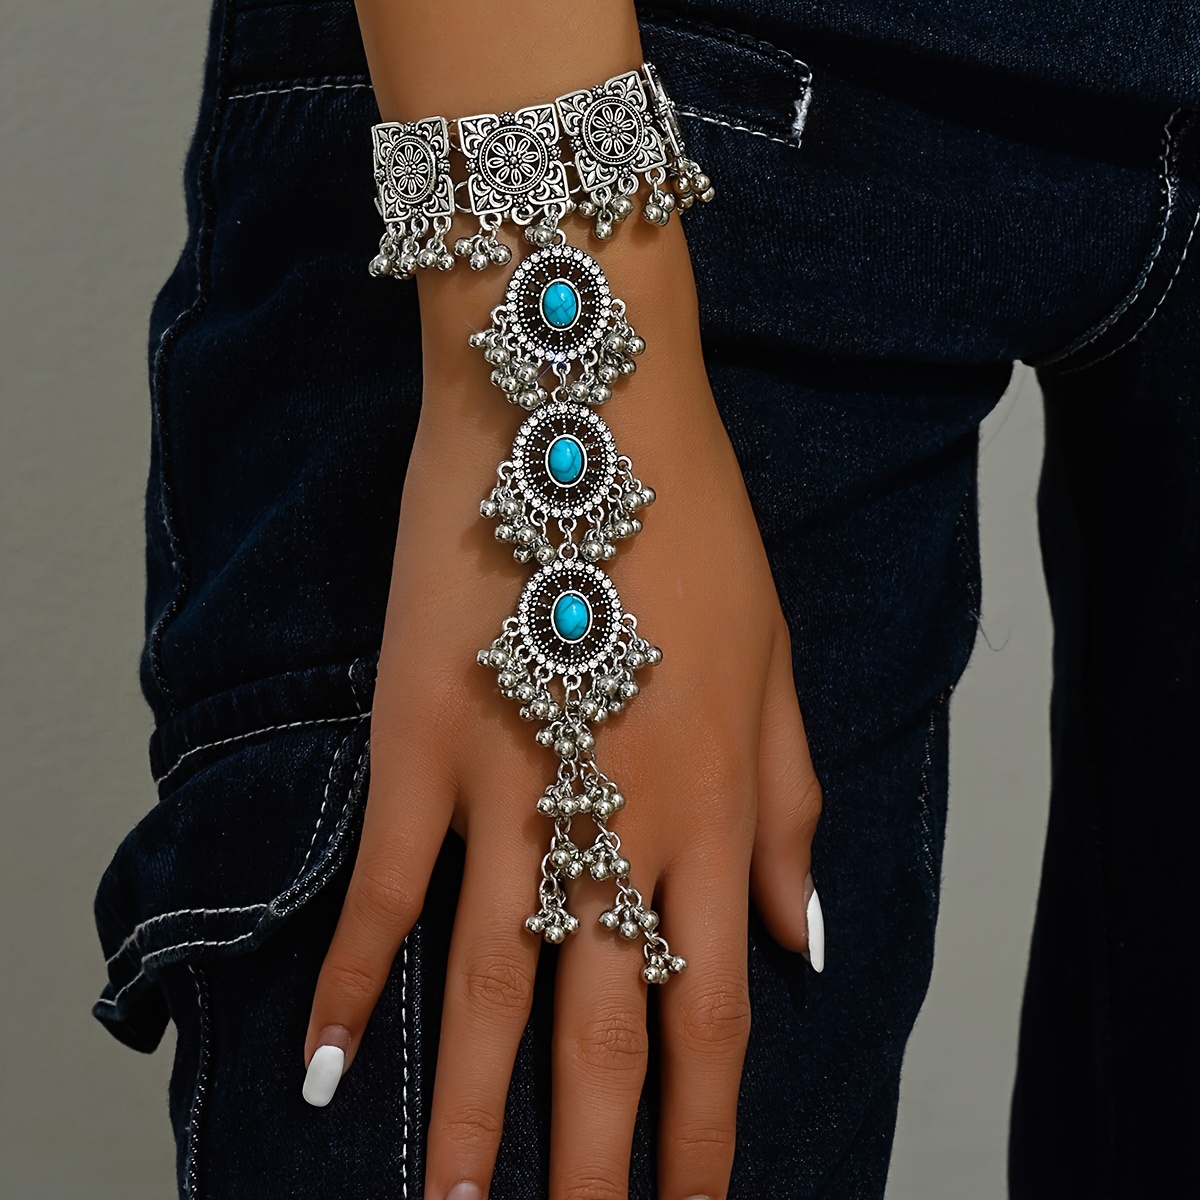 

Sparking Exquisite Mitten Bracelet Alloy Jewelry Embellished With Turquoise Vintage Bollywood Style For Women Gift